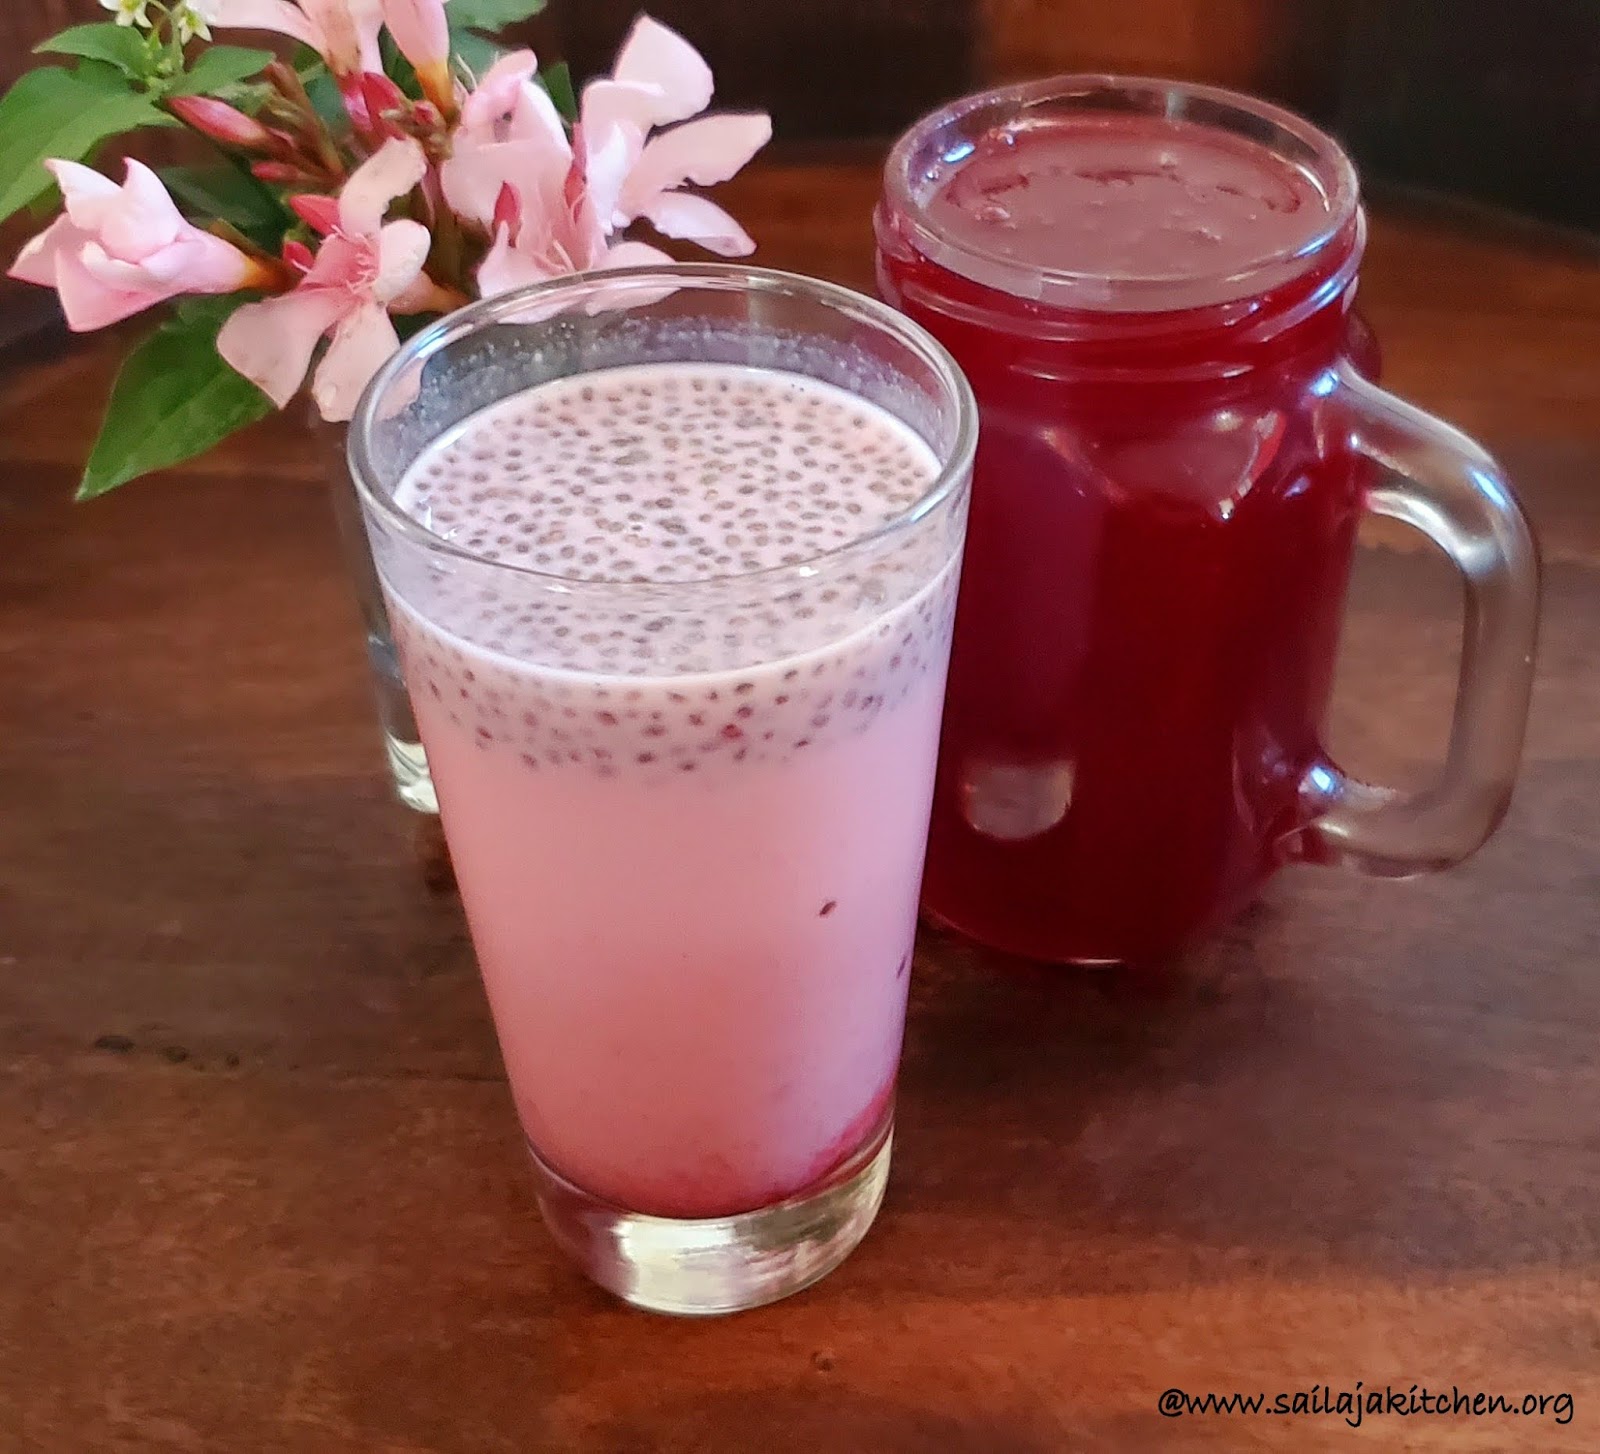 Sailaja Kitchen...A site for all food lovers!: Beetroot Syrup / Beet ...